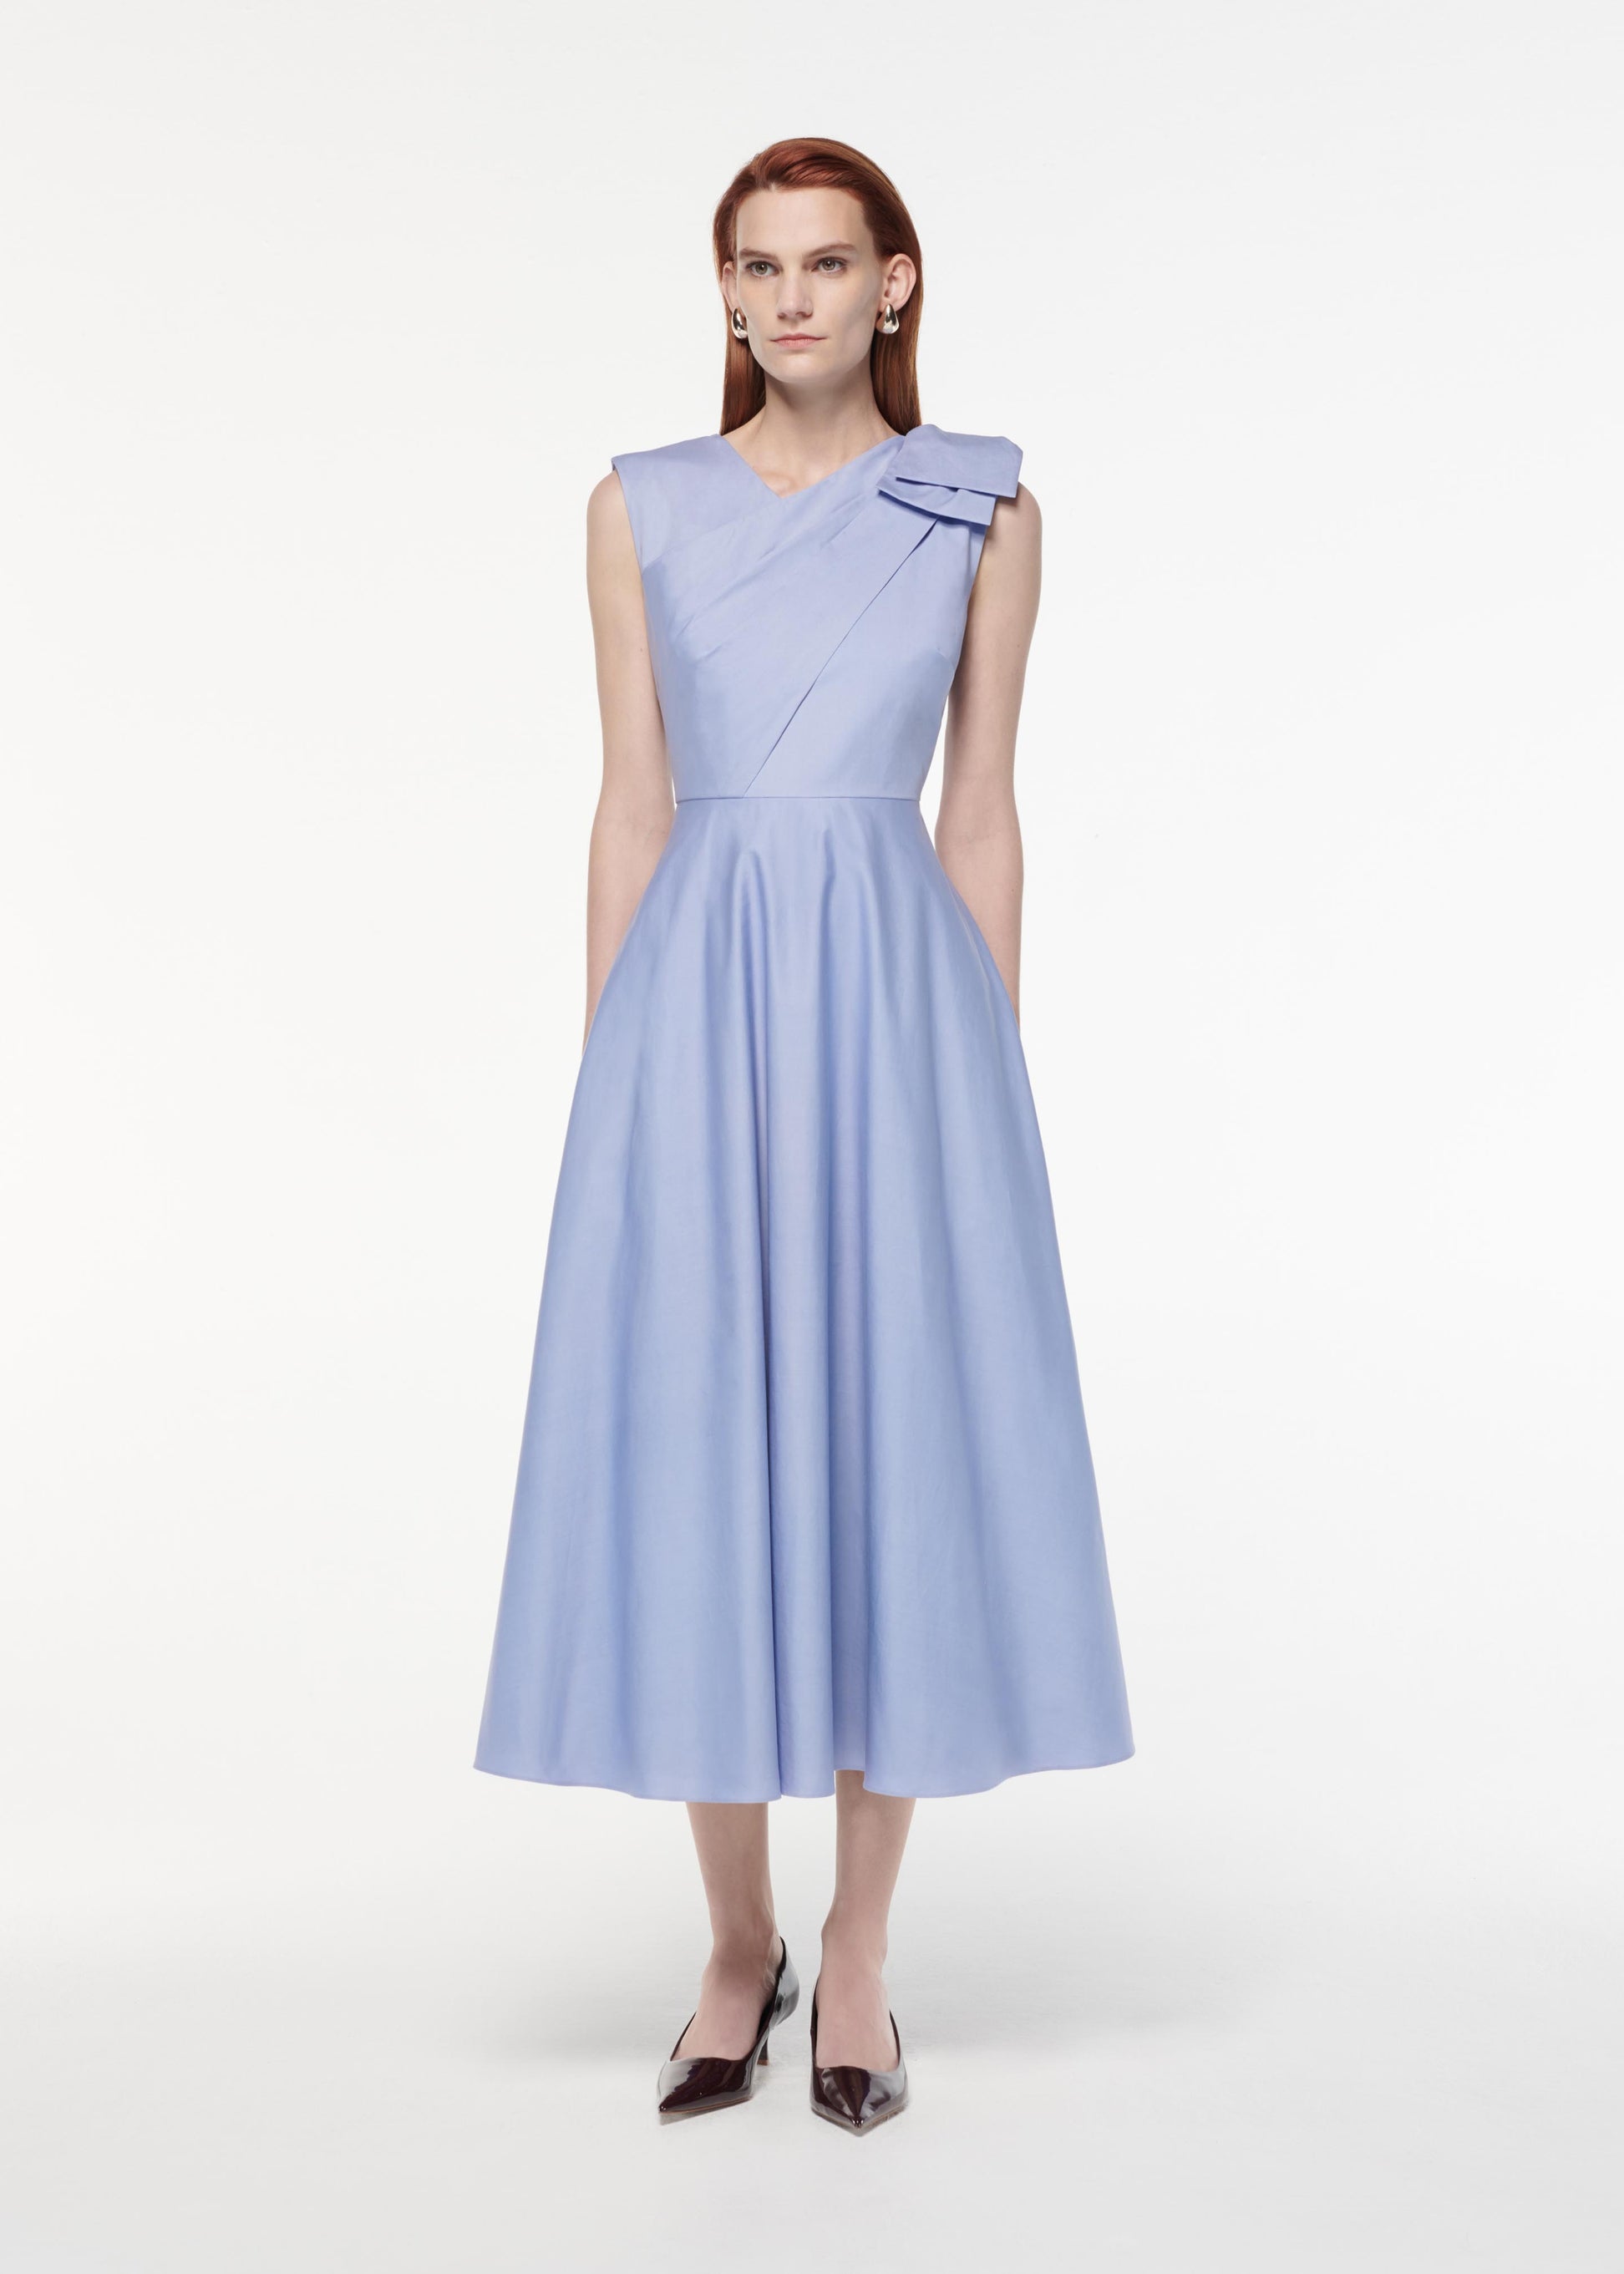 A photograph of a woman wearing a Bow Cotton Poplin Midi Dress in Blue